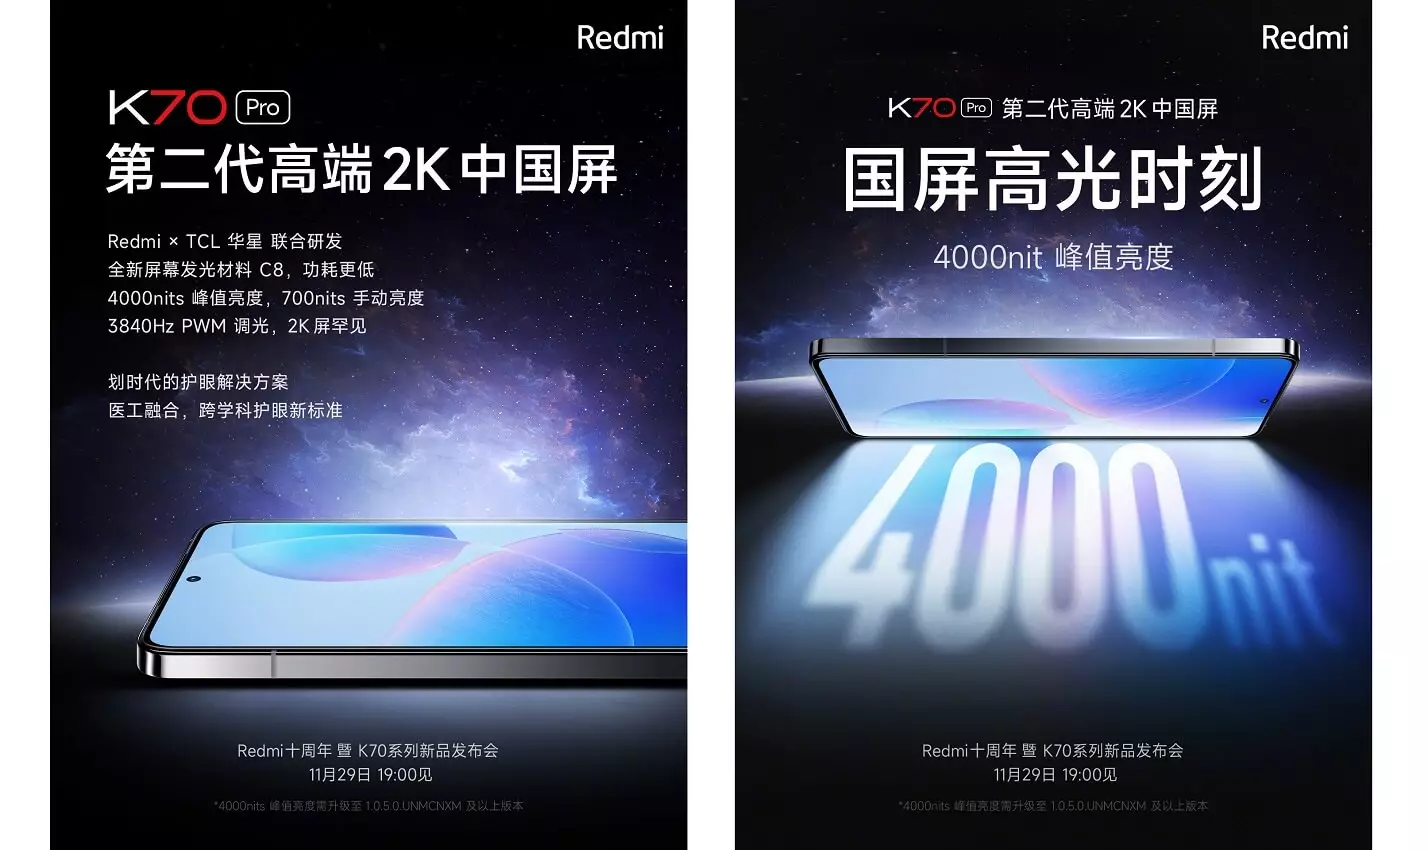 Redmi K70 Pro will be launched on November 29th with 2K OLED screen, up to  4000 nits peak brightness